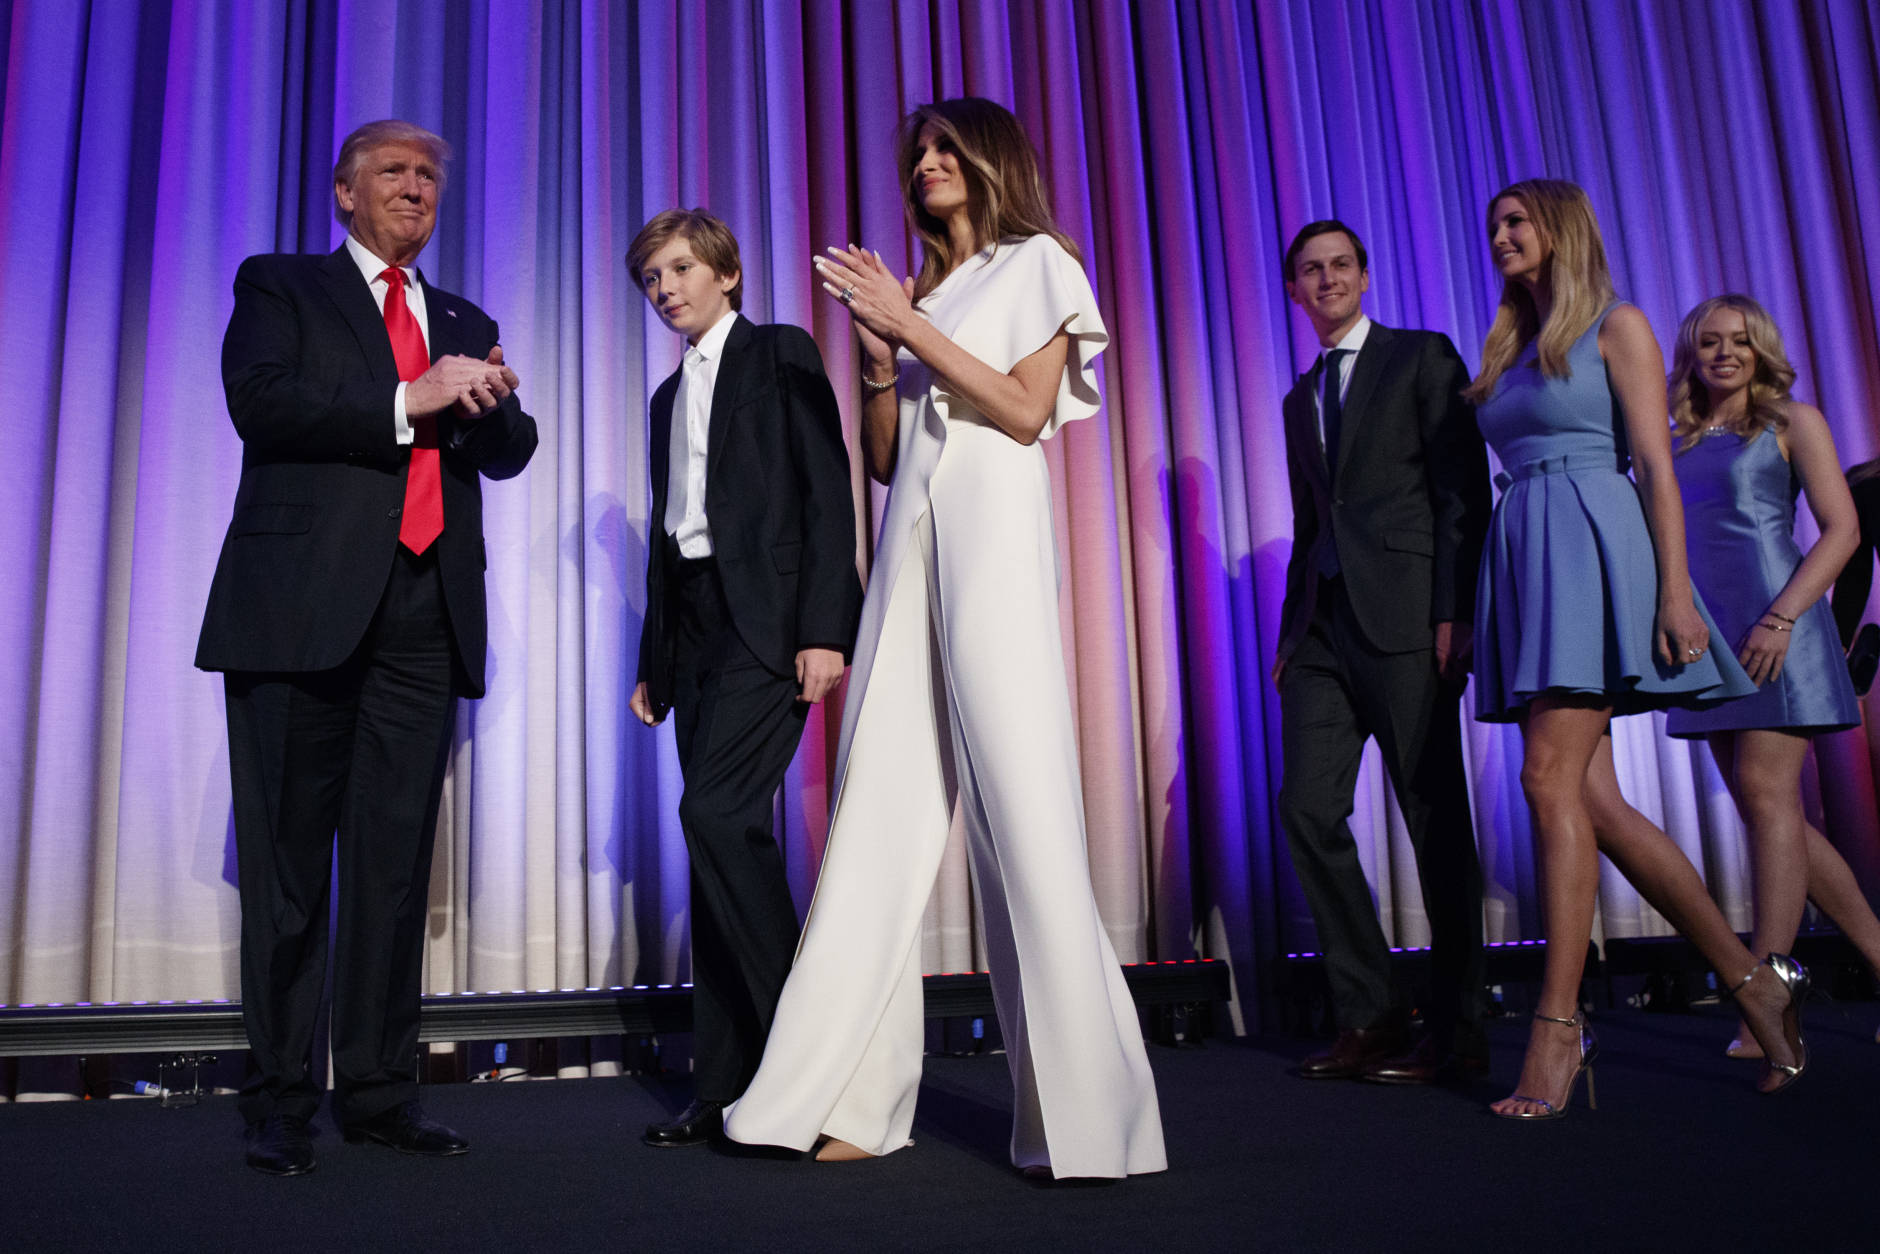 Republican presidential candidate Donald Trump, left, arrives to speak to an election night rally, Wednesday, Nov. 9, 2016, in New York. From left, Trump, his son Barron, wife Melania, Jared Kushner, Ivanka Trump, and Tiffany Trump. (AP Photo/ Evan Vucci)